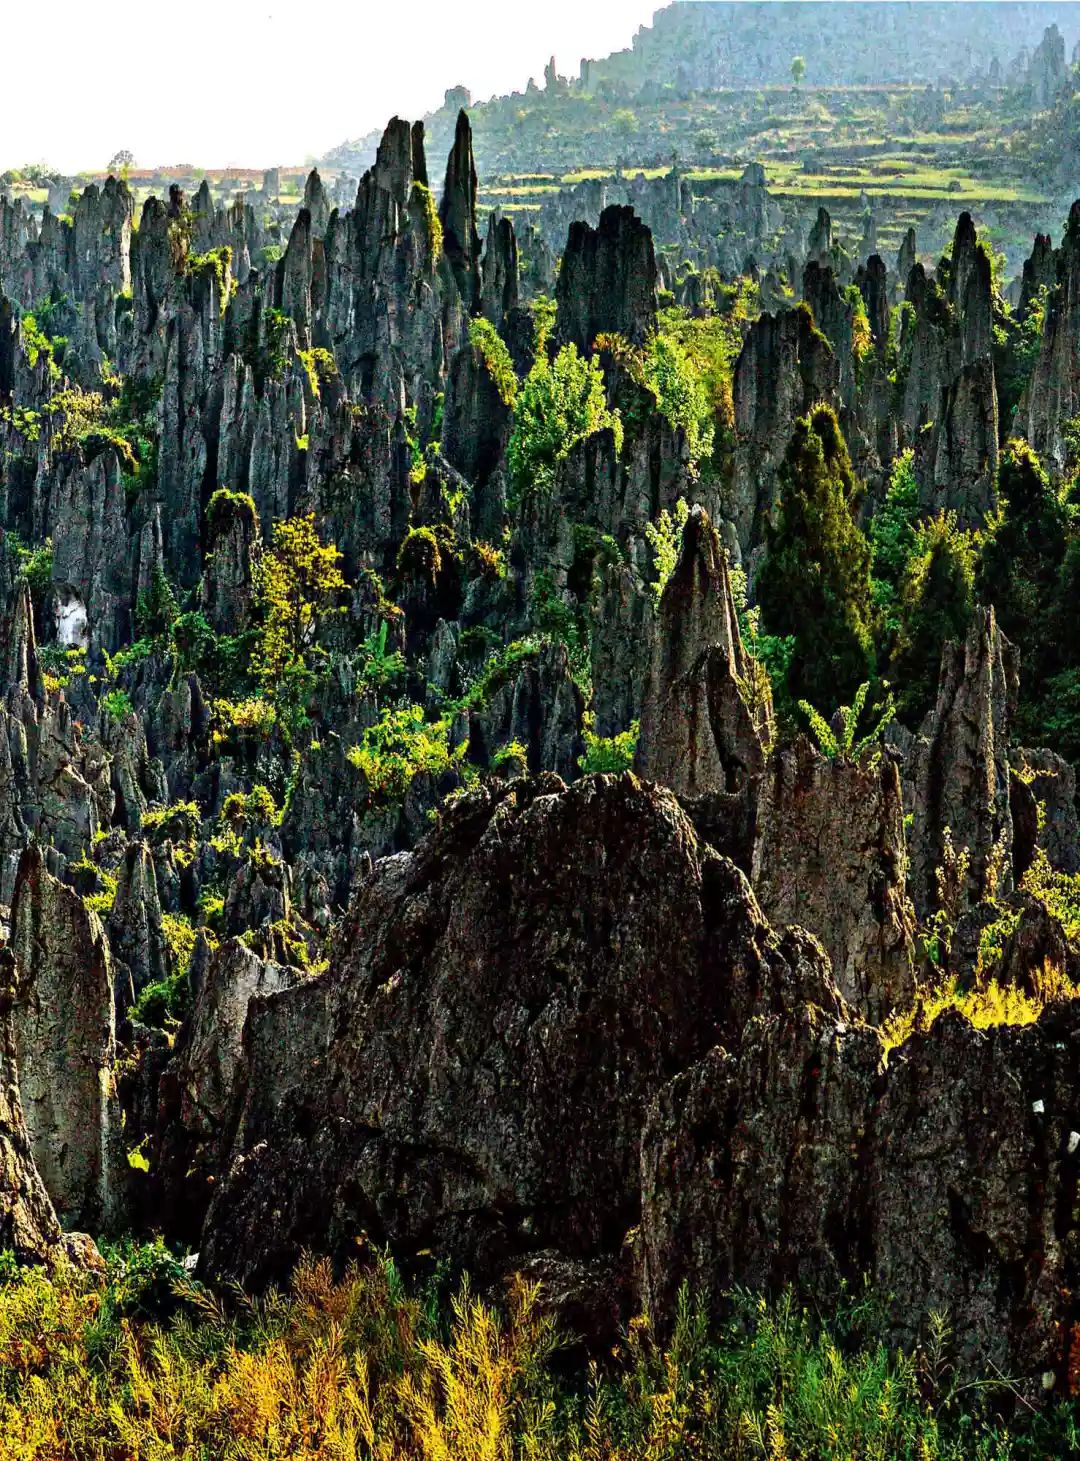 Geography丨Niddang Stone Forest in Southwest Guizhou: The Essence of Ancient Geological Movements